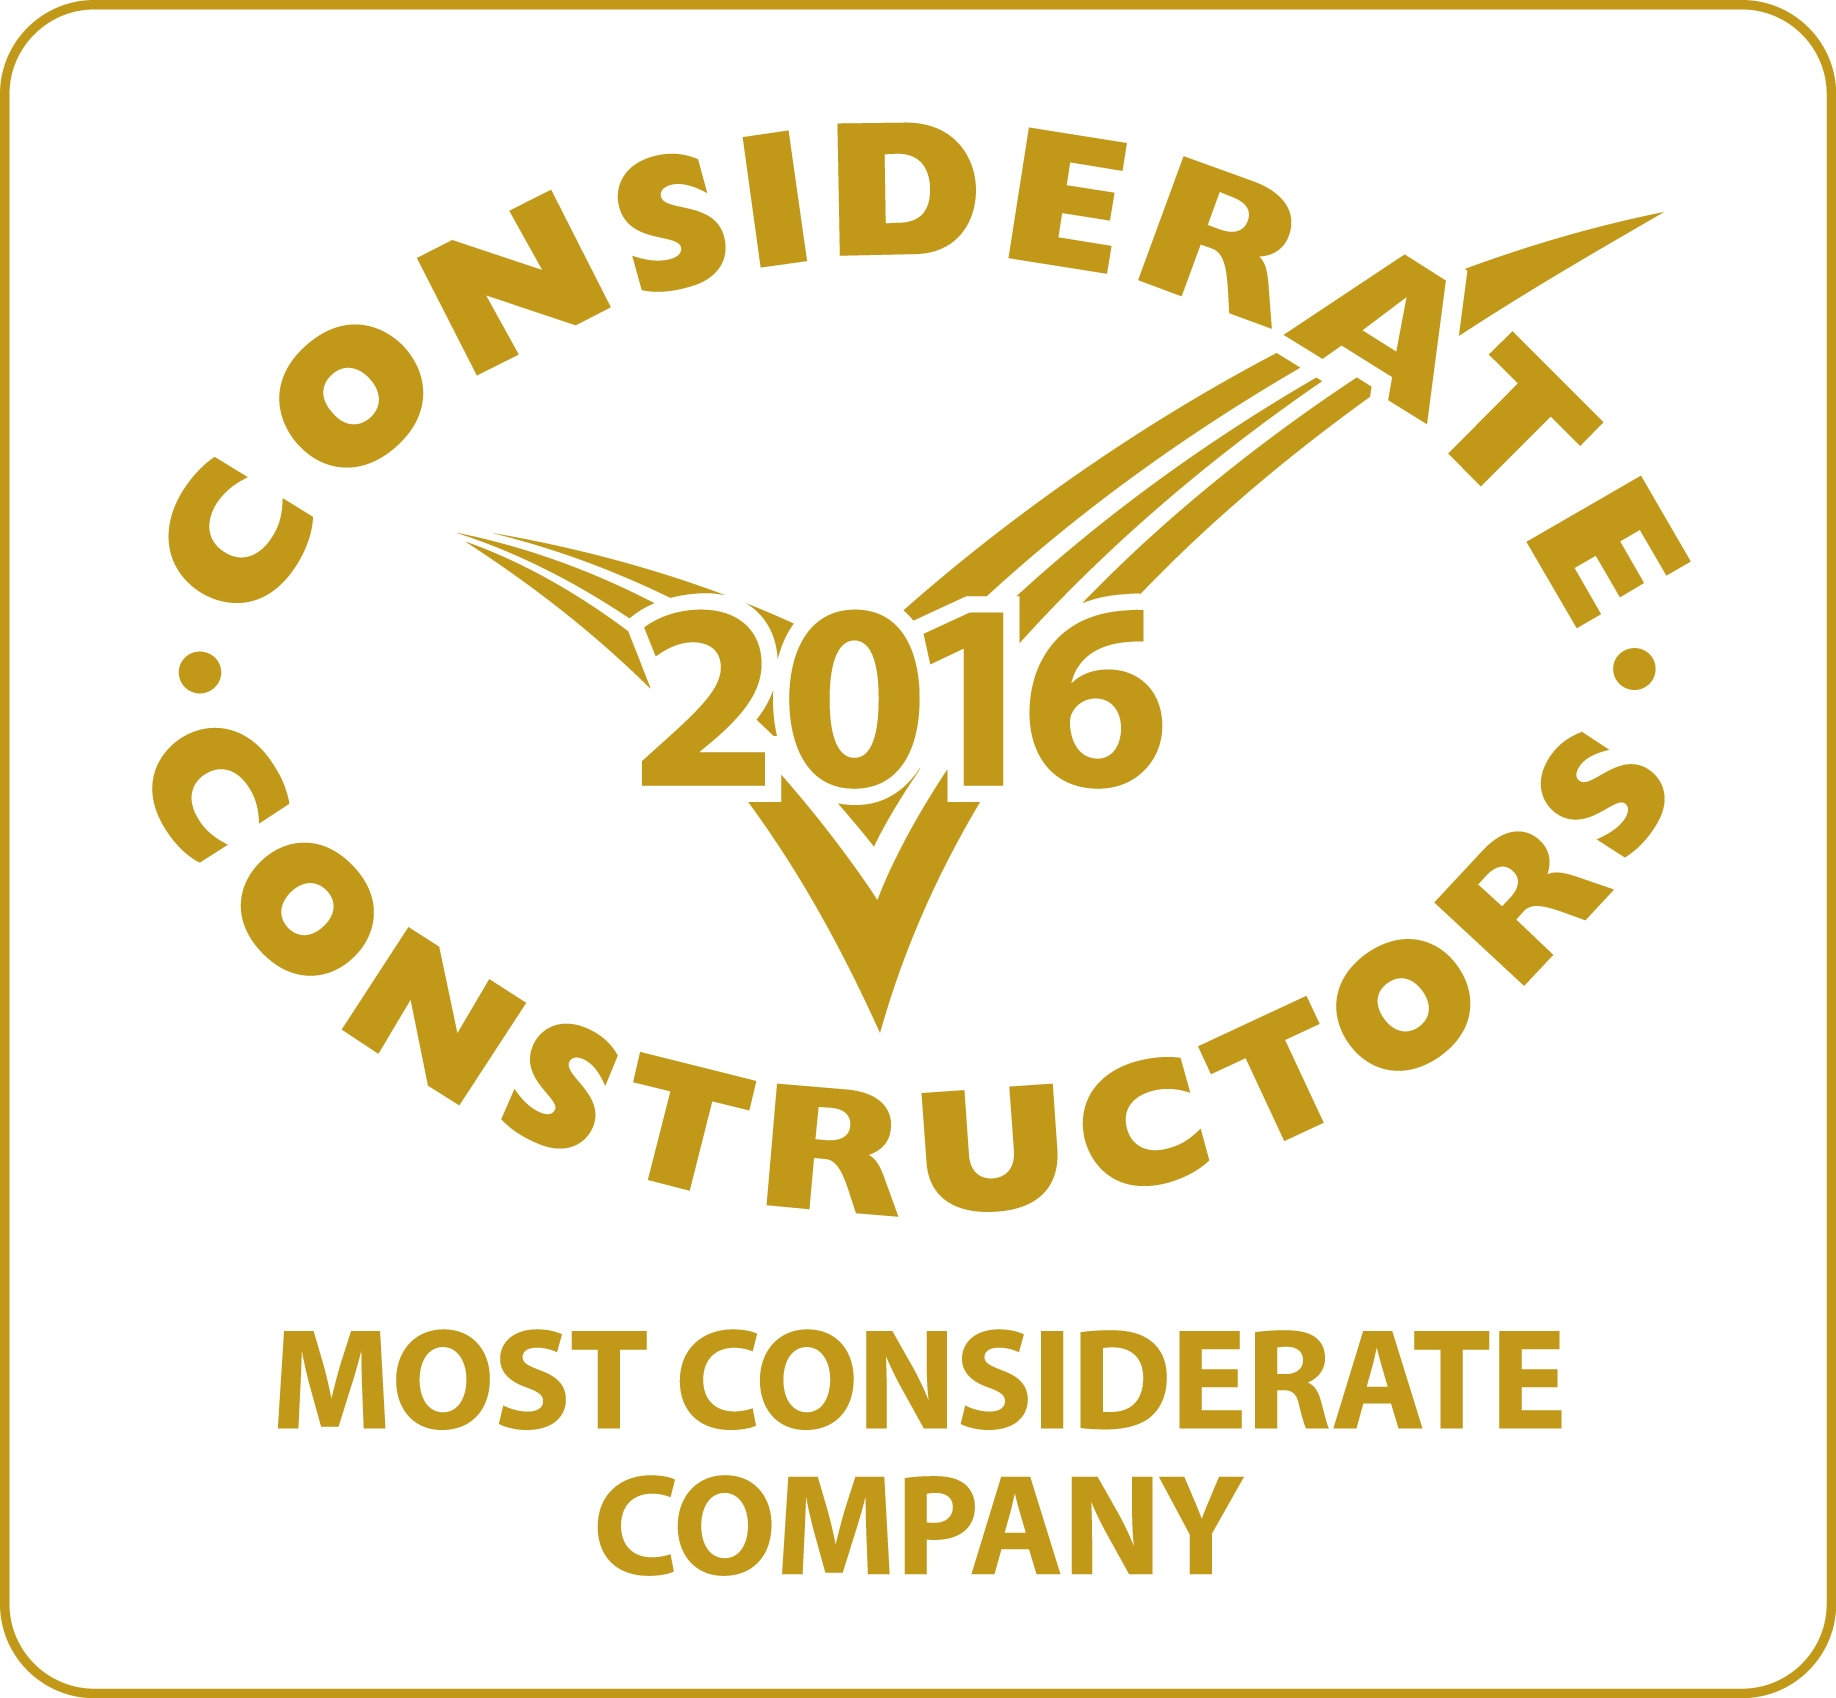 Connect Plus awarded as Most Considerate Company at 2016 National Awards